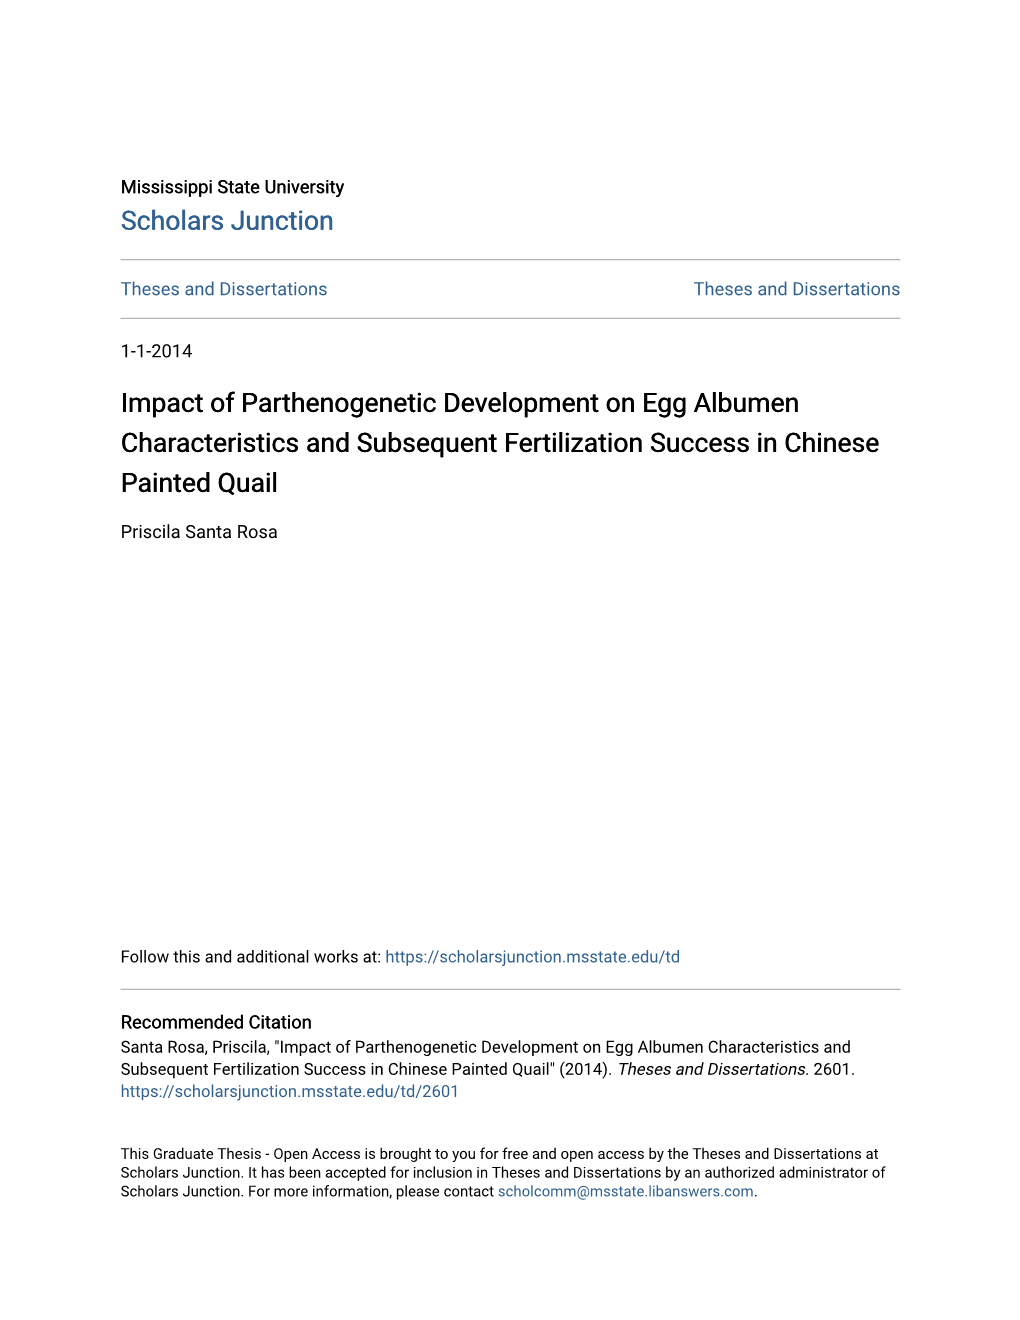 Impact of Parthenogenetic Development on Egg Albumen Characteristics and Subsequent Fertilization Success in Chinese Painted Quail